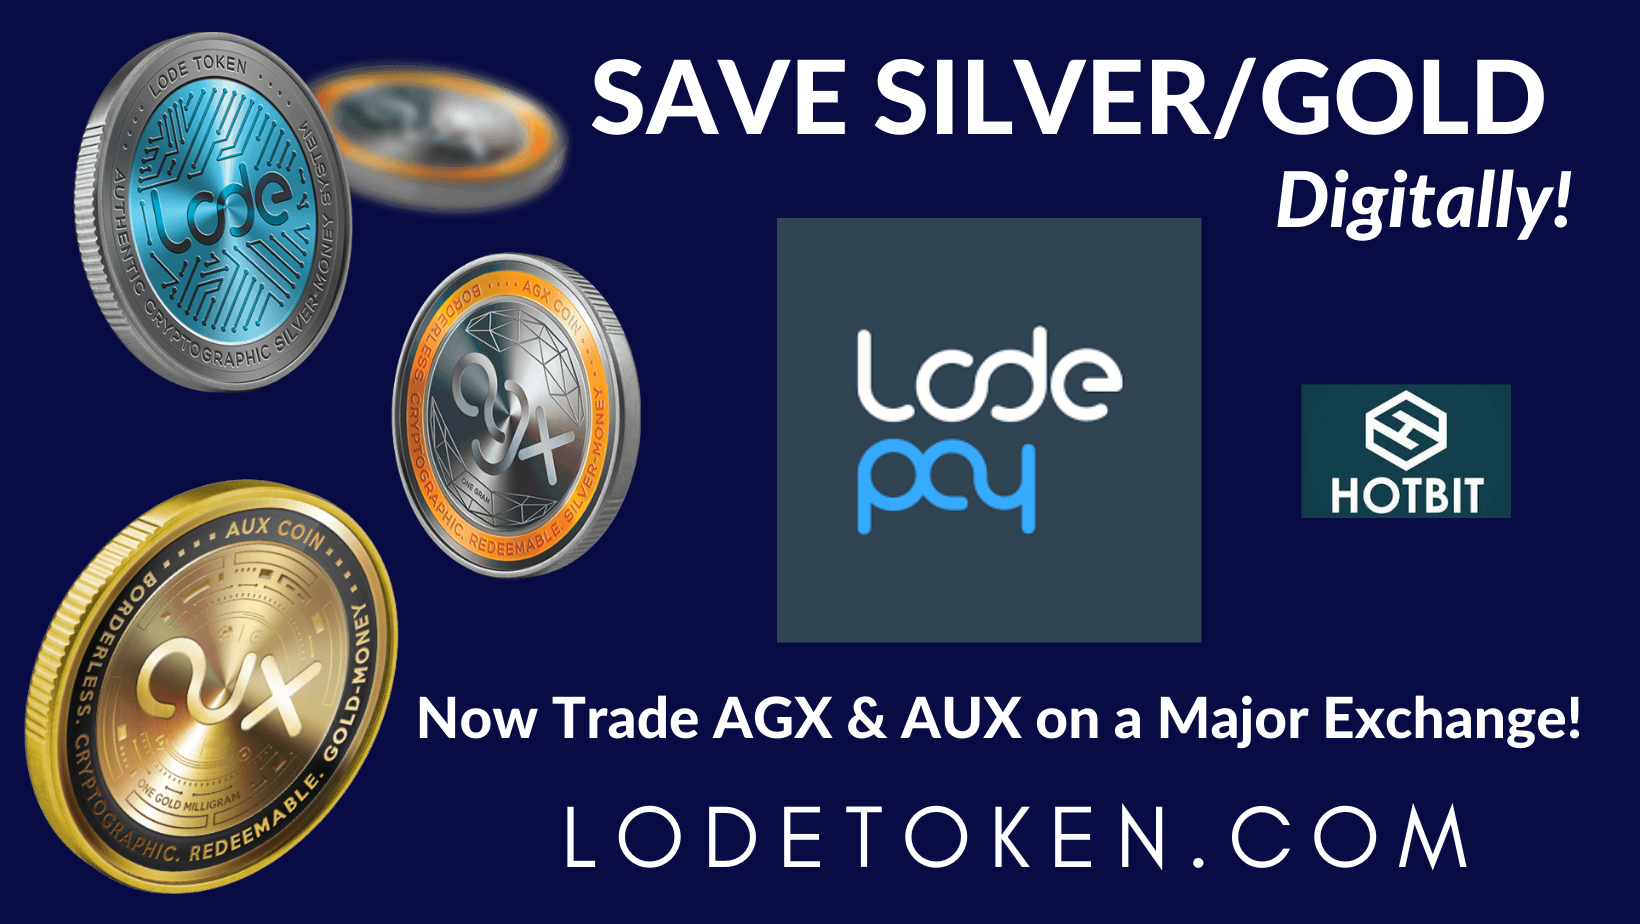 LODE ..SAVE GOLD SILVER DIGITALLY 2.0 - LACI Opinion - Mike Williams Closes Out Incredible Prime Time Game